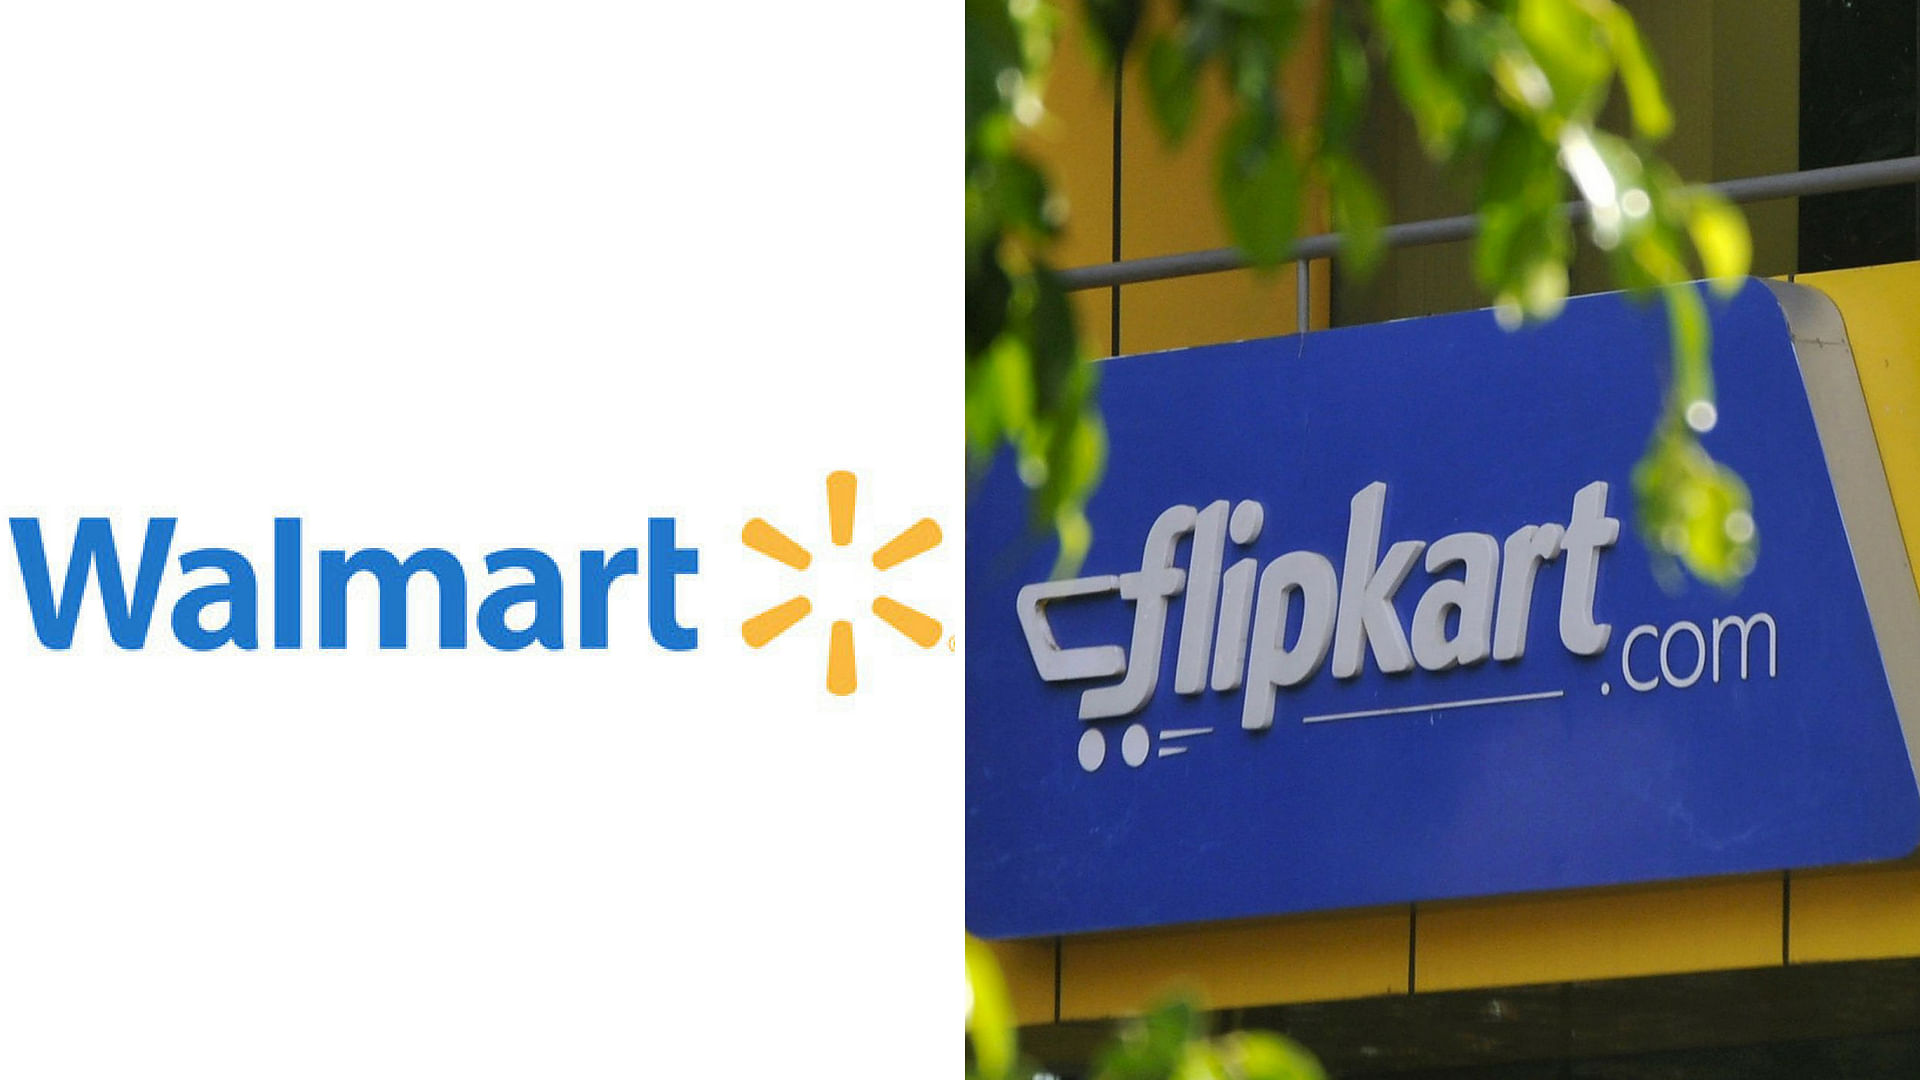 Walmart confirms its entry into India’s highly competitive online retail sector.